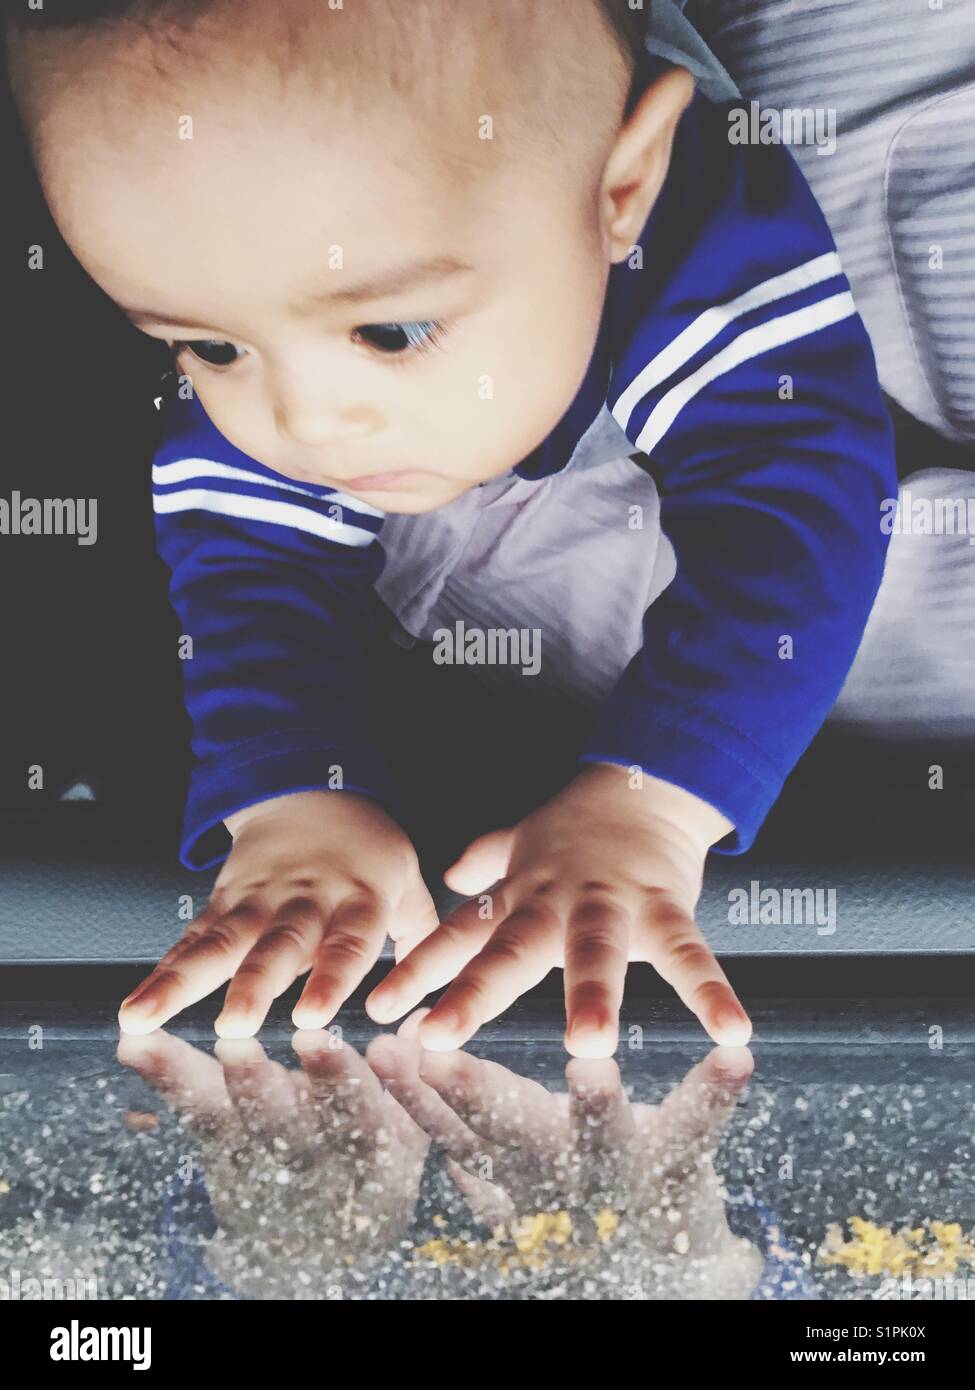 Reflection of cute baby boy's hands on window. Glooming day and raining day concepts. Stock Photo